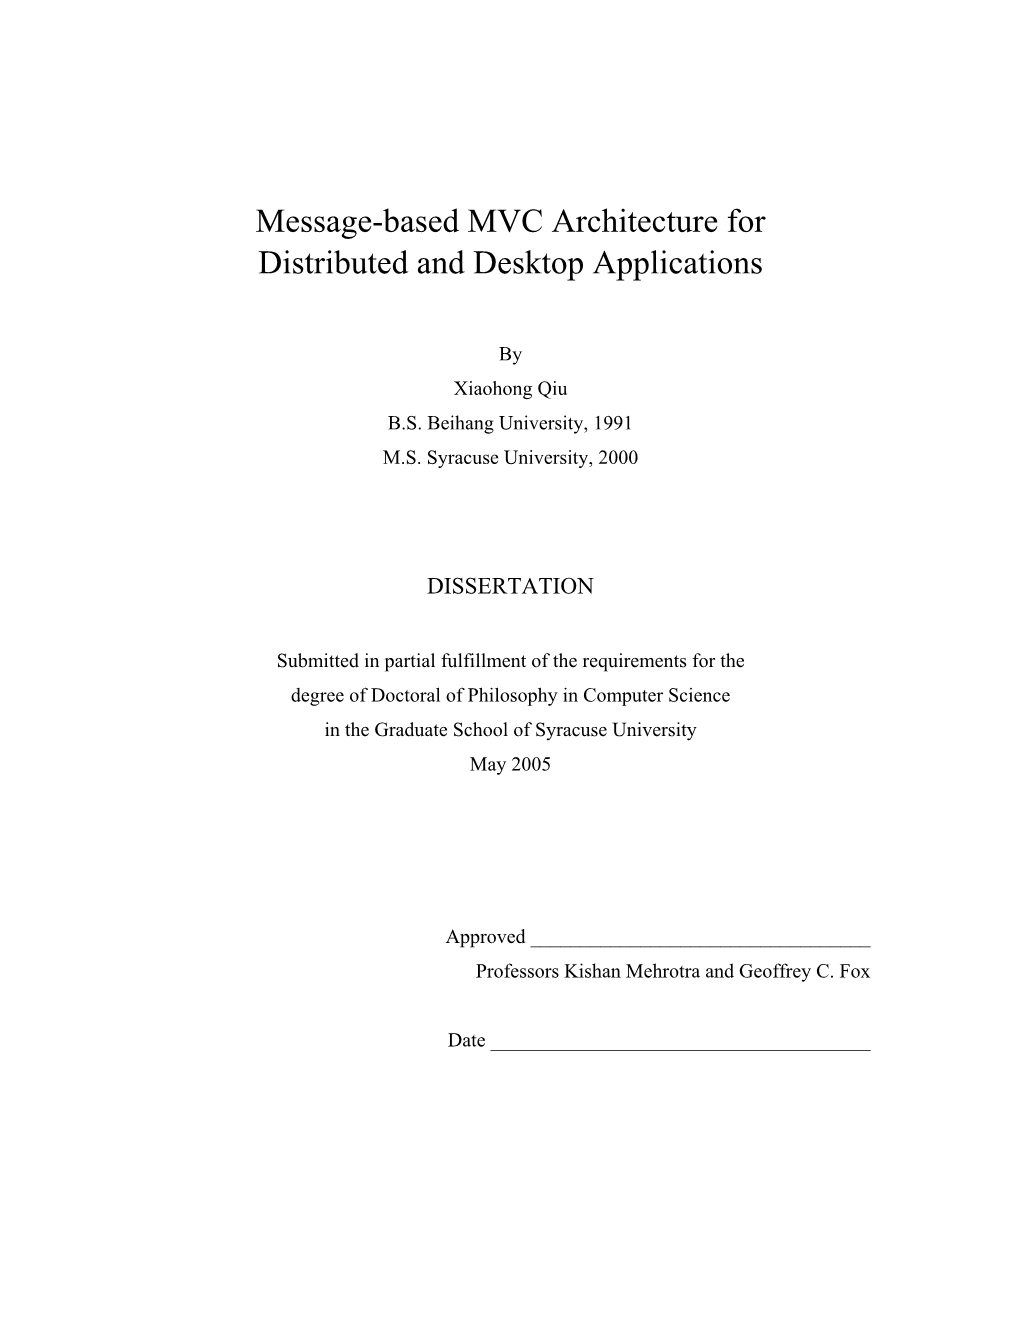 Message-Based MVC Architecture for Distributed and Desktop Applications